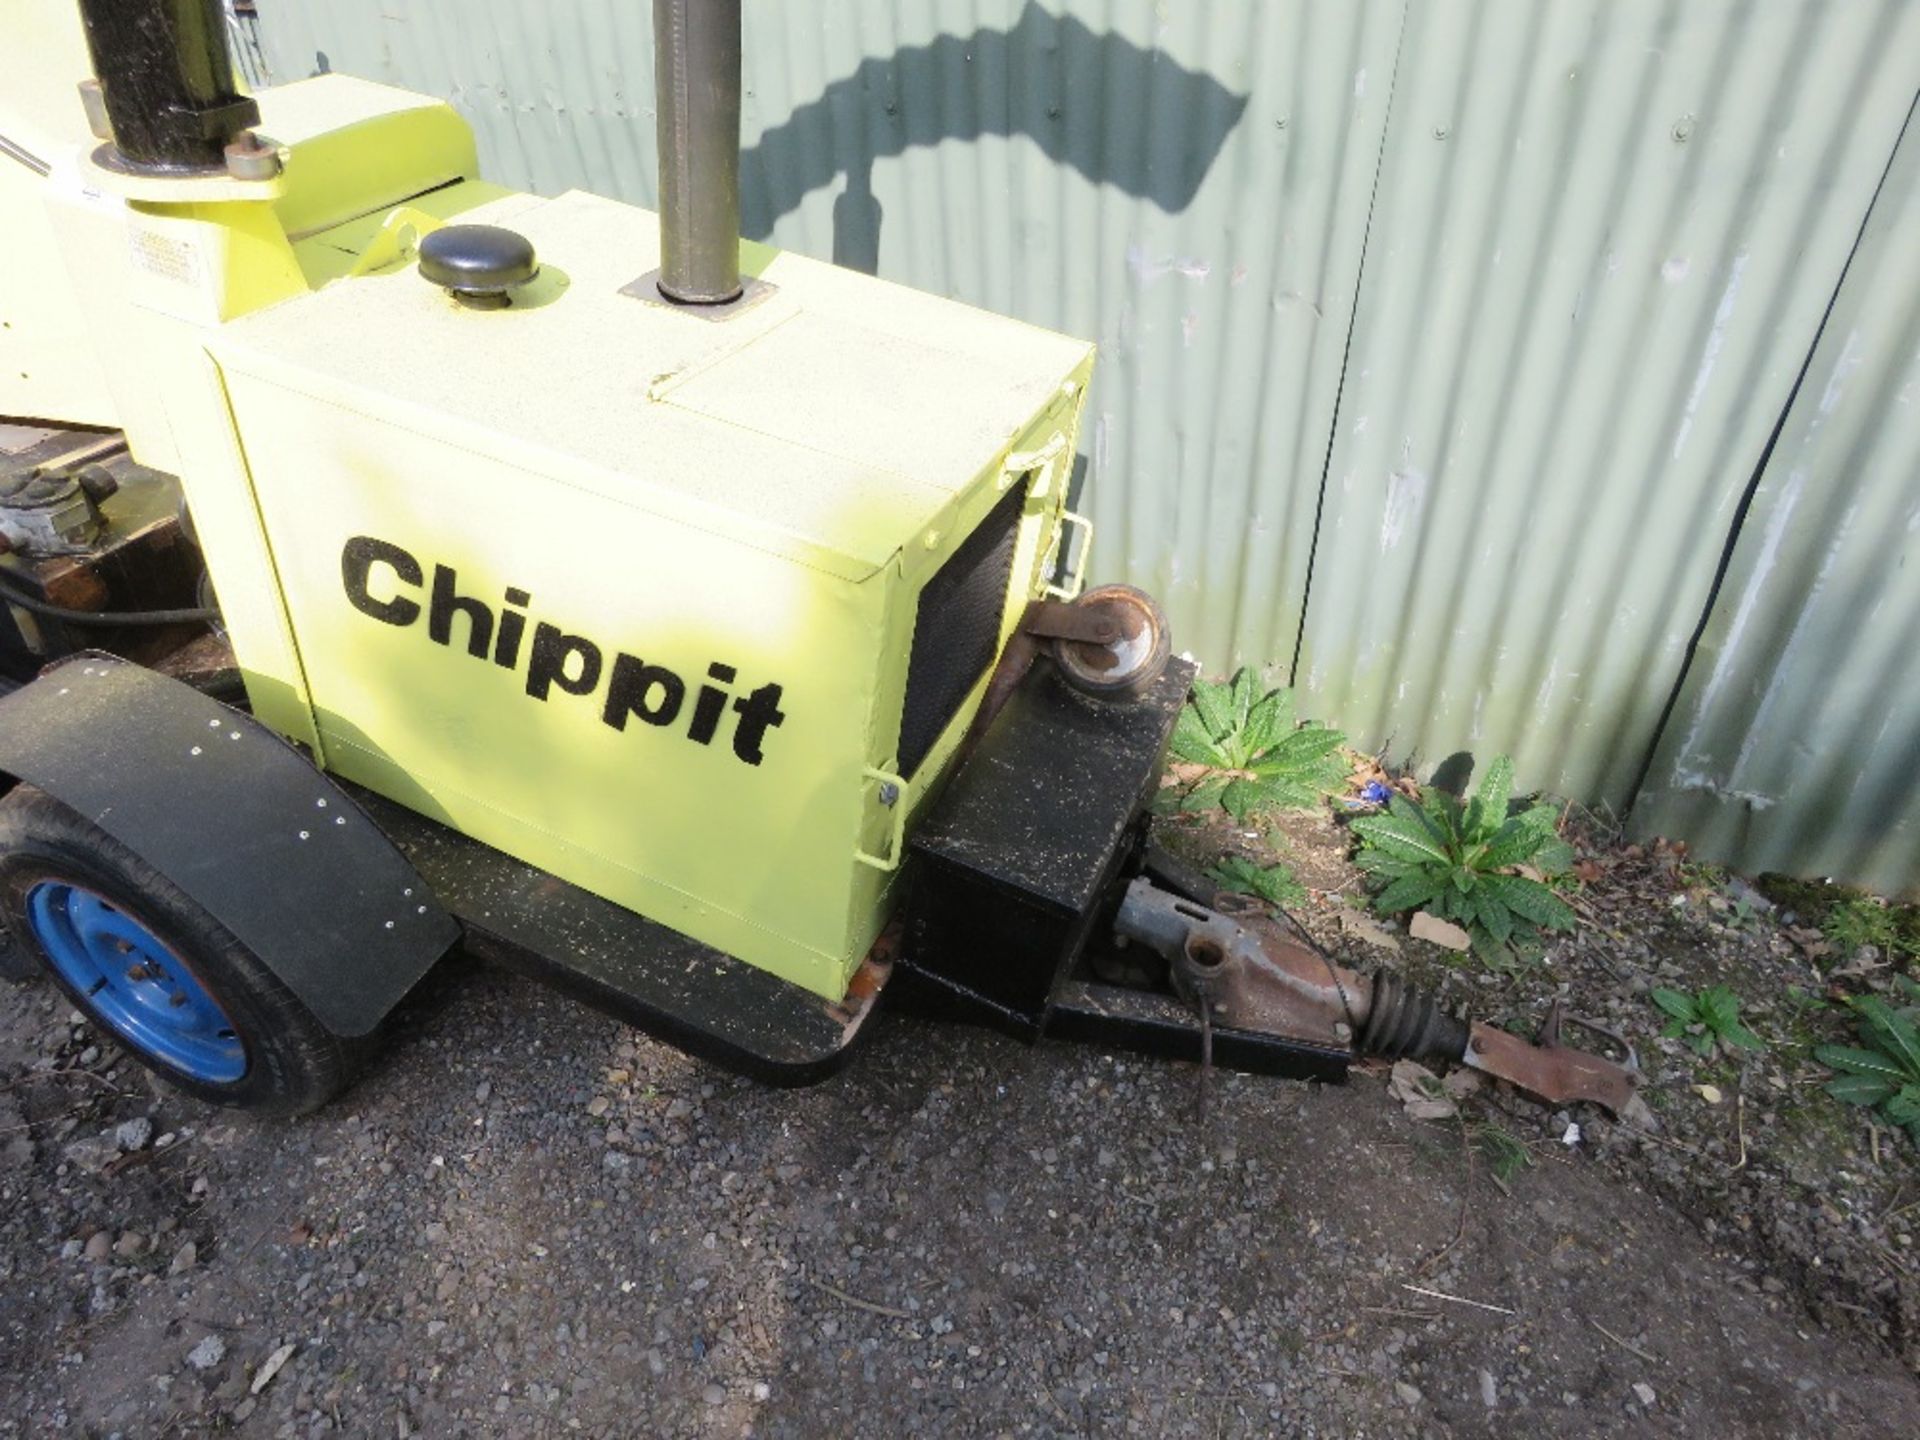 CHIPPIT TOWED CHIPPER UNIT, KUBOTA ENGINE. WHEN TESTED WAS SEEN TO RUN AND BLADES TURNED. THIS LOT I - Image 2 of 5